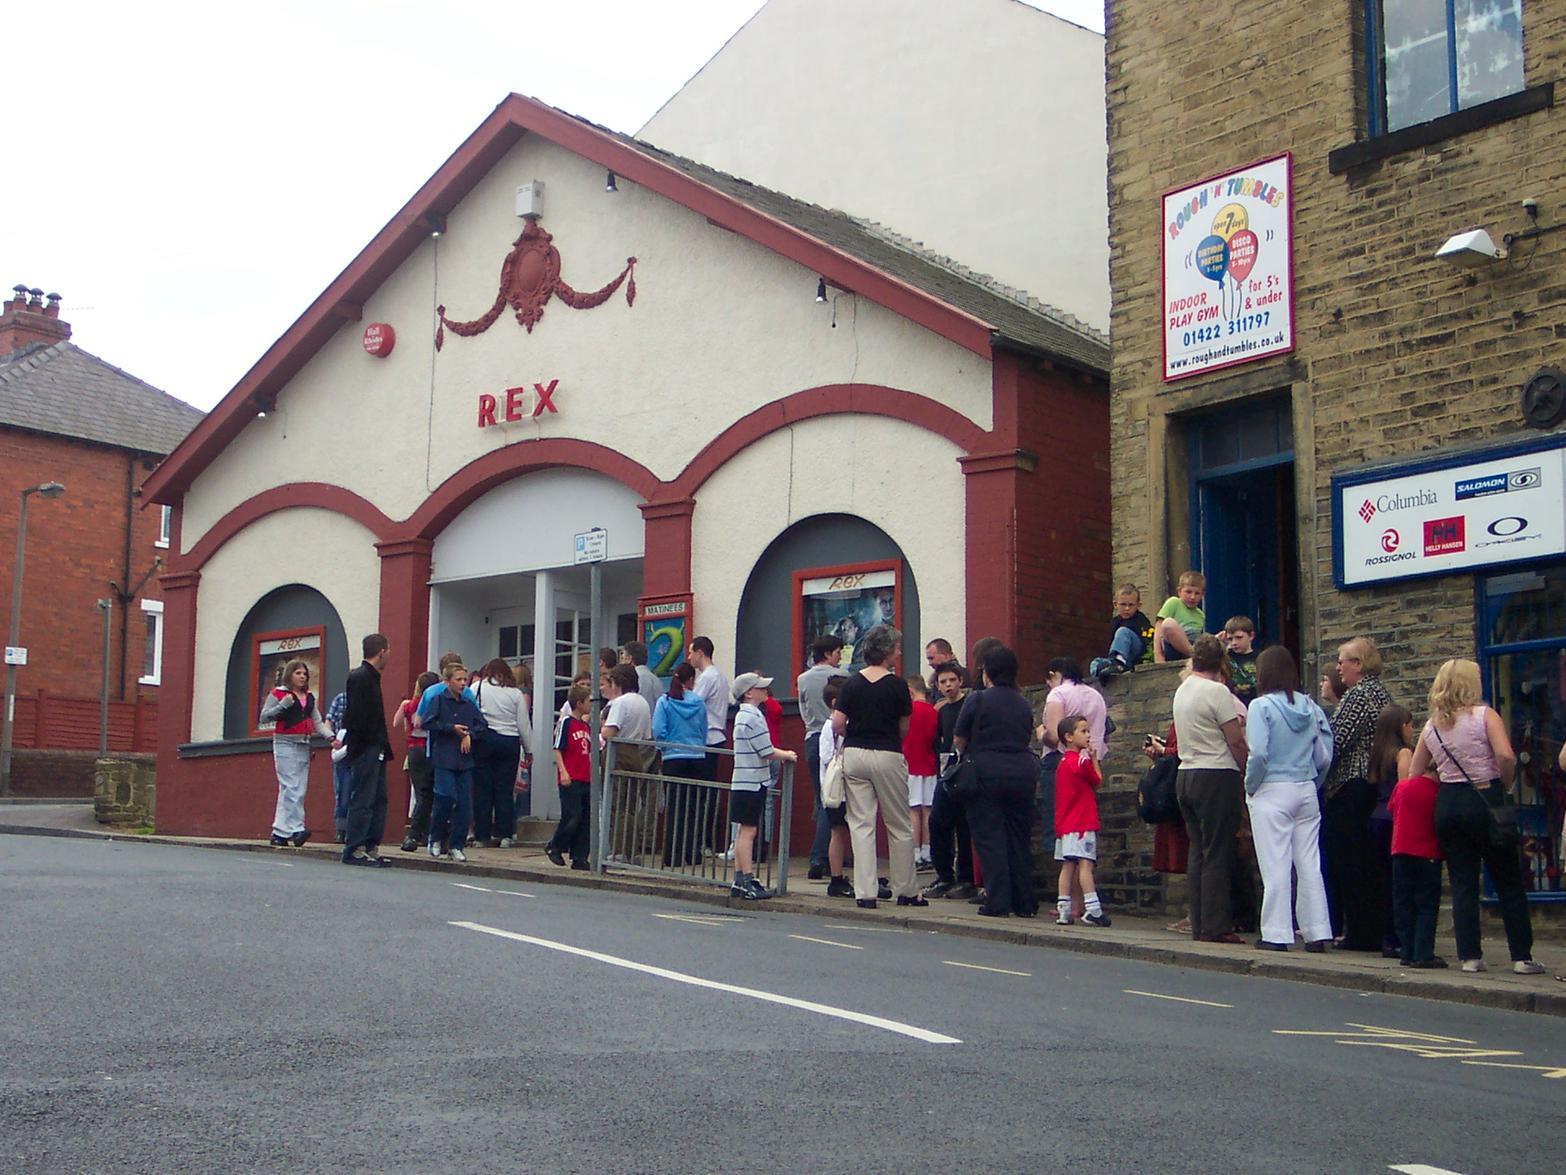 The Rex Cinema is an iconic Elland landmark that has been entertaining residents since 1912. This picture shows Harry Potter fans queuing outside in 2004 ready to see the third film in the franchise.